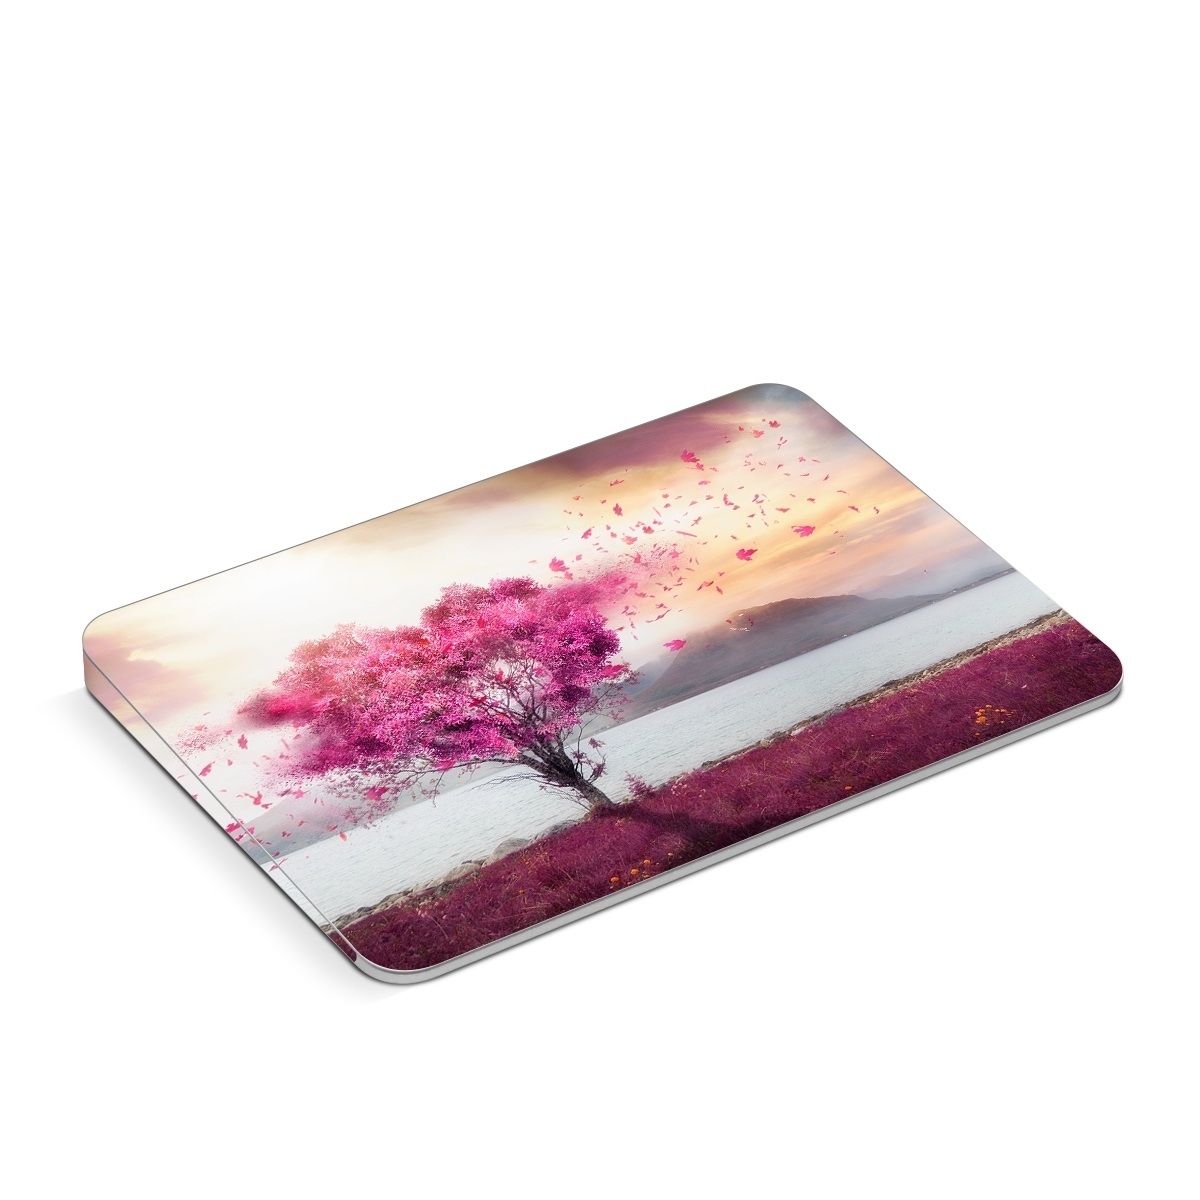 Apple Magic Trackpad Skin design of Sky, Nature, Natural landscape, Pink, Tree, Spring, Purple, Landscape, Cloud, Magenta, with pink, yellow, blue, black, gray colors